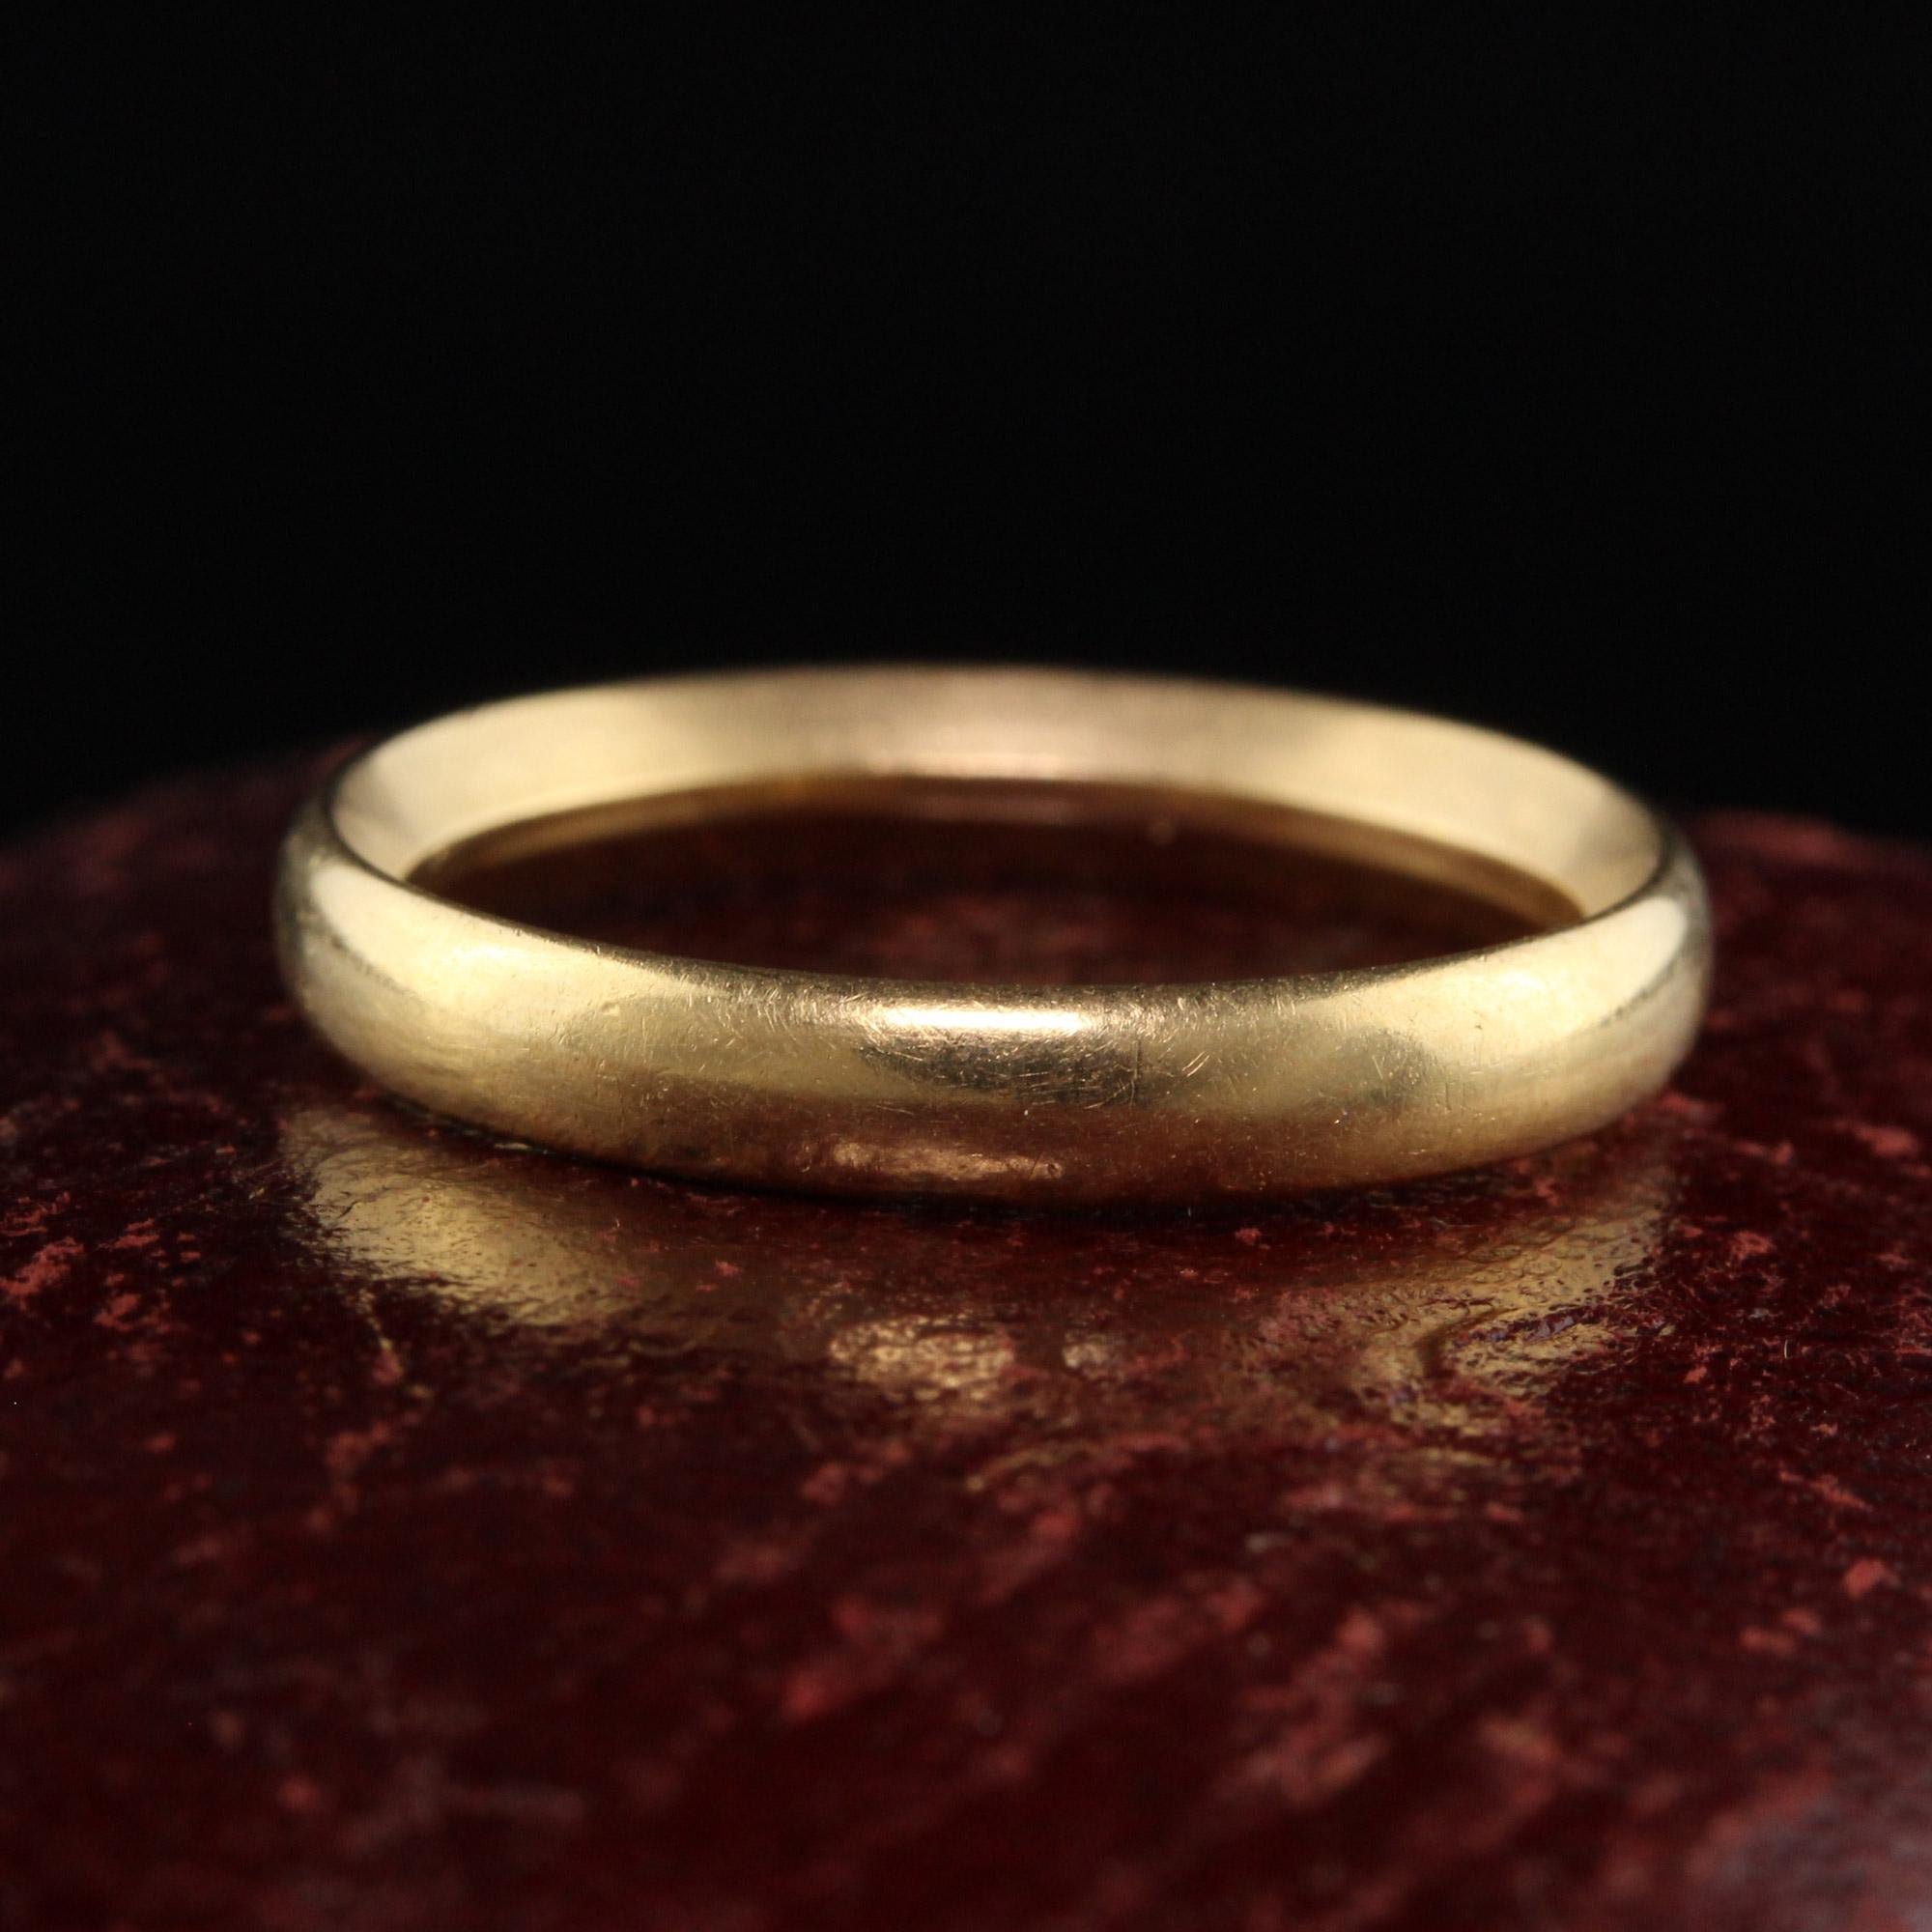 Beautiful Antique Art Deco 18K Yellow Gold Classic Wedding Band. This classic wedding band is crafted in 18K yellow gold. It has an interesting shape where it curves at an angle inwards on the inside of the band.

Item #R1217

Metal: 18K Yellow